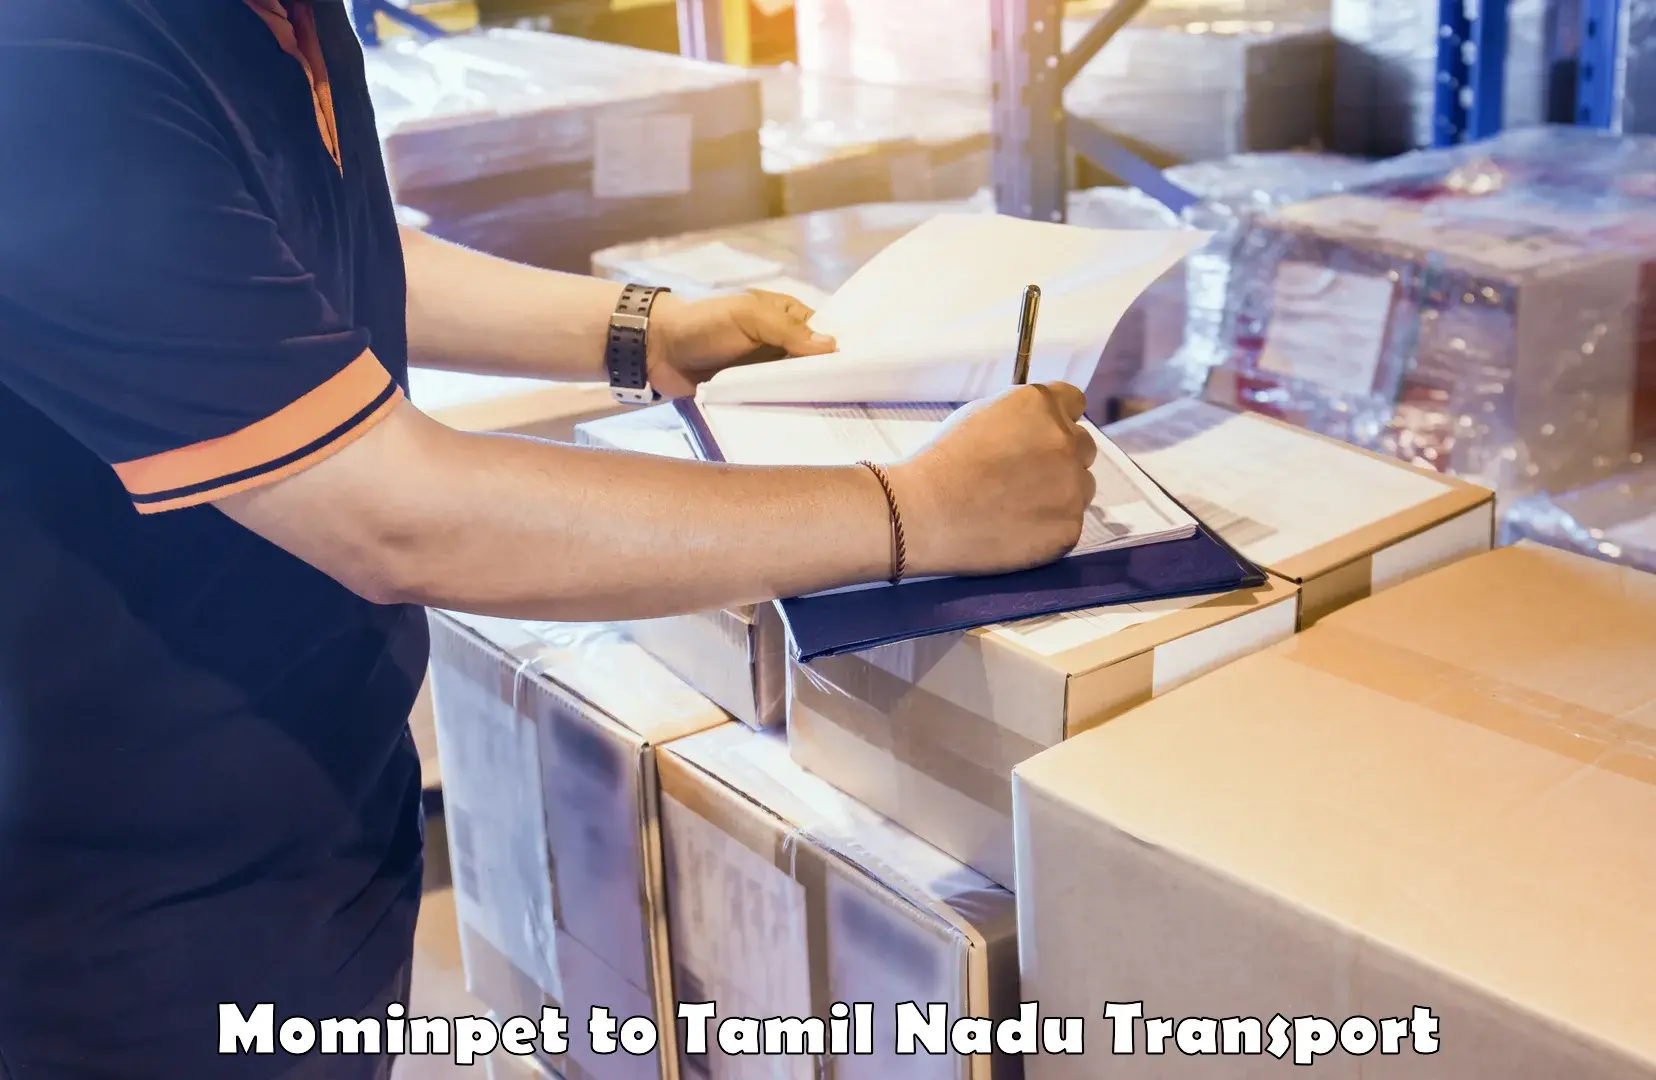 Road transport services Mominpet to Nagercoil